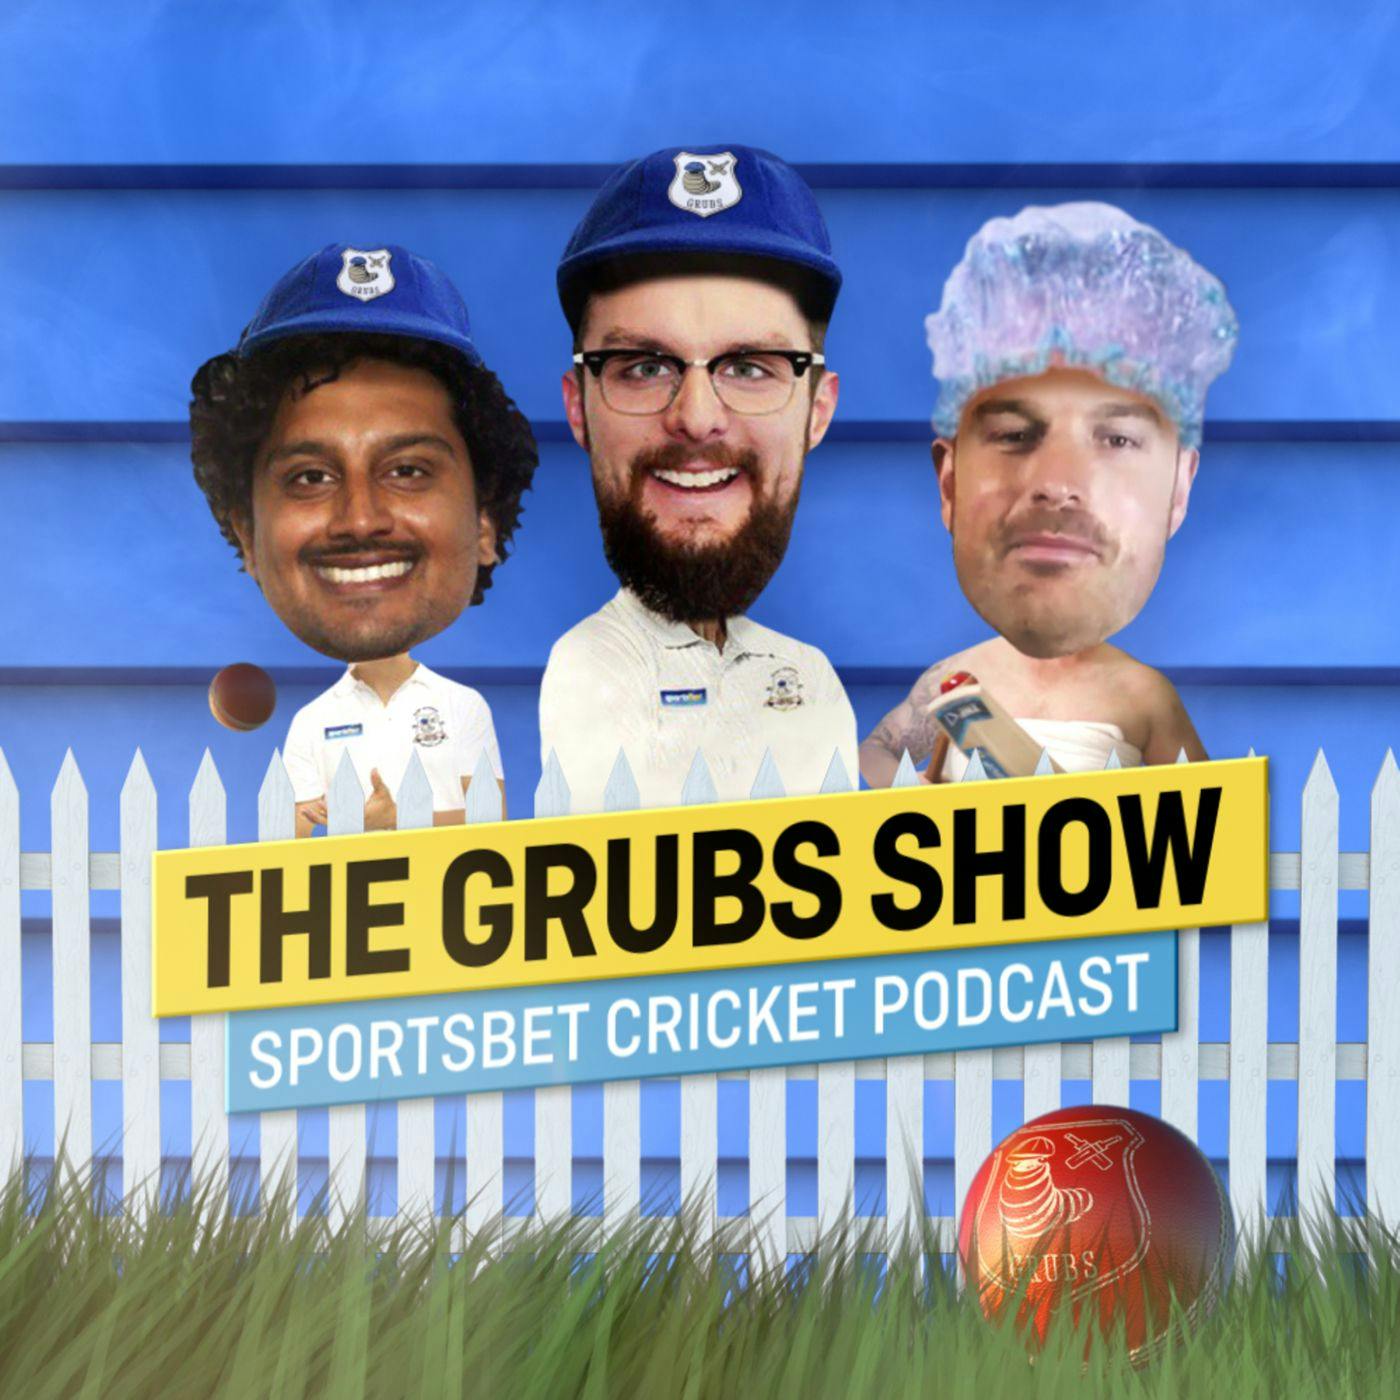 S2 Ep 8 - Grubs on Tour: Everything is Fine